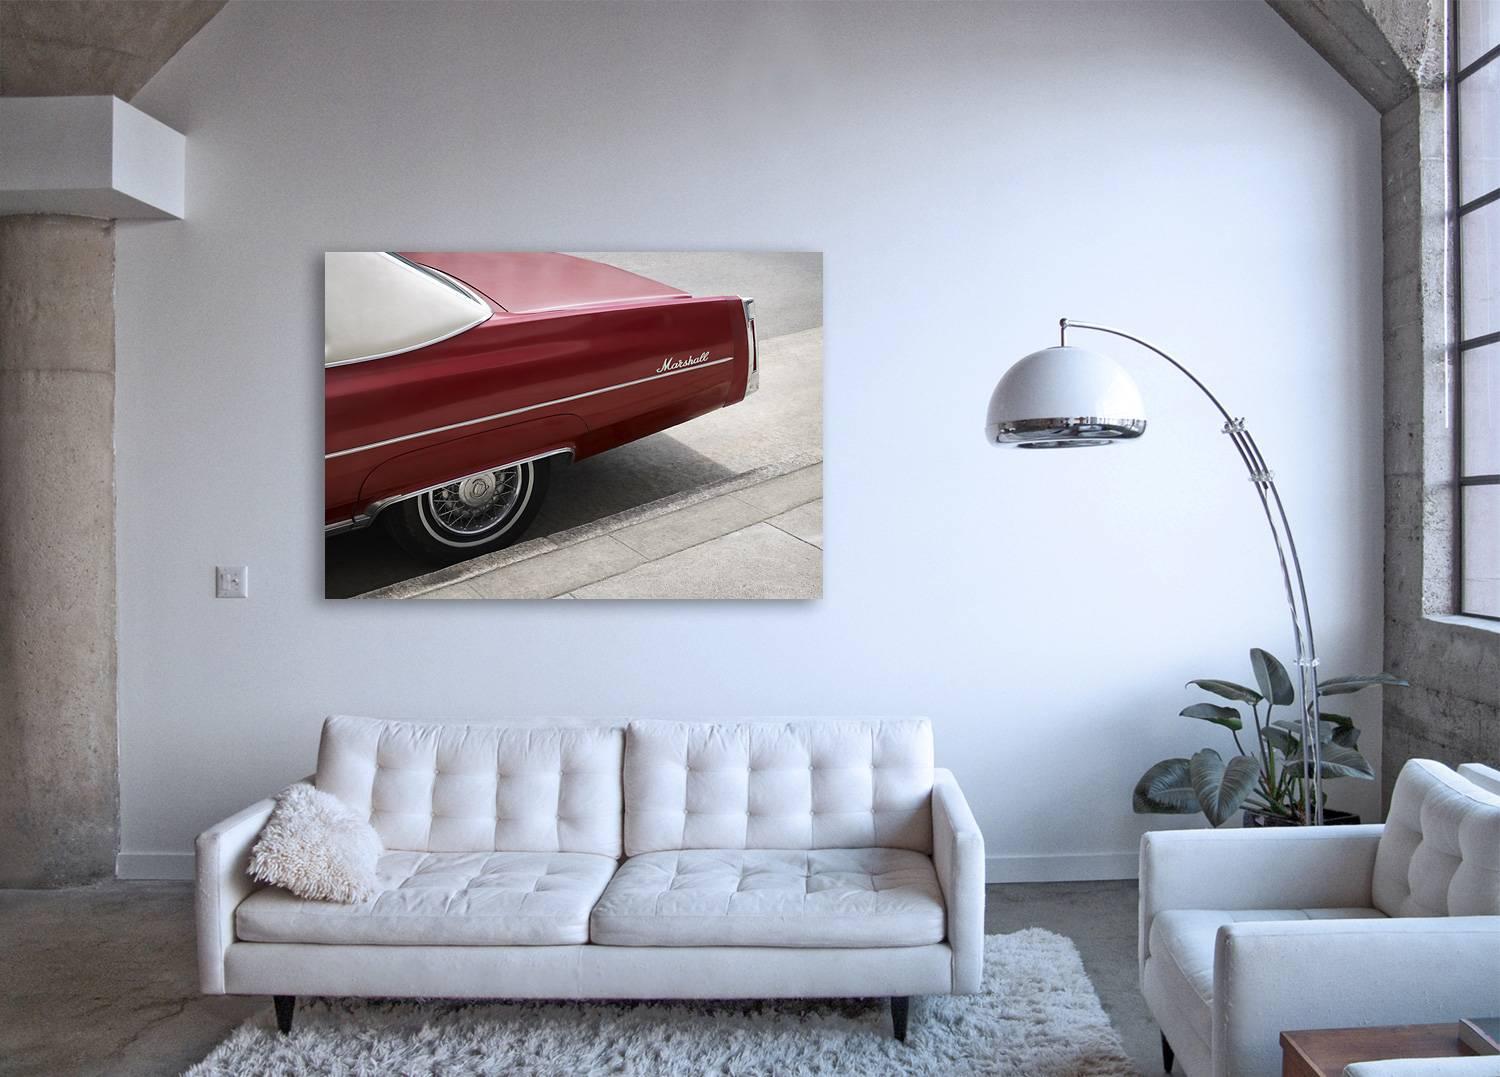 Marshall - large format photograph of iconic cherry red Cadillac automobile - Print by Frank Schott